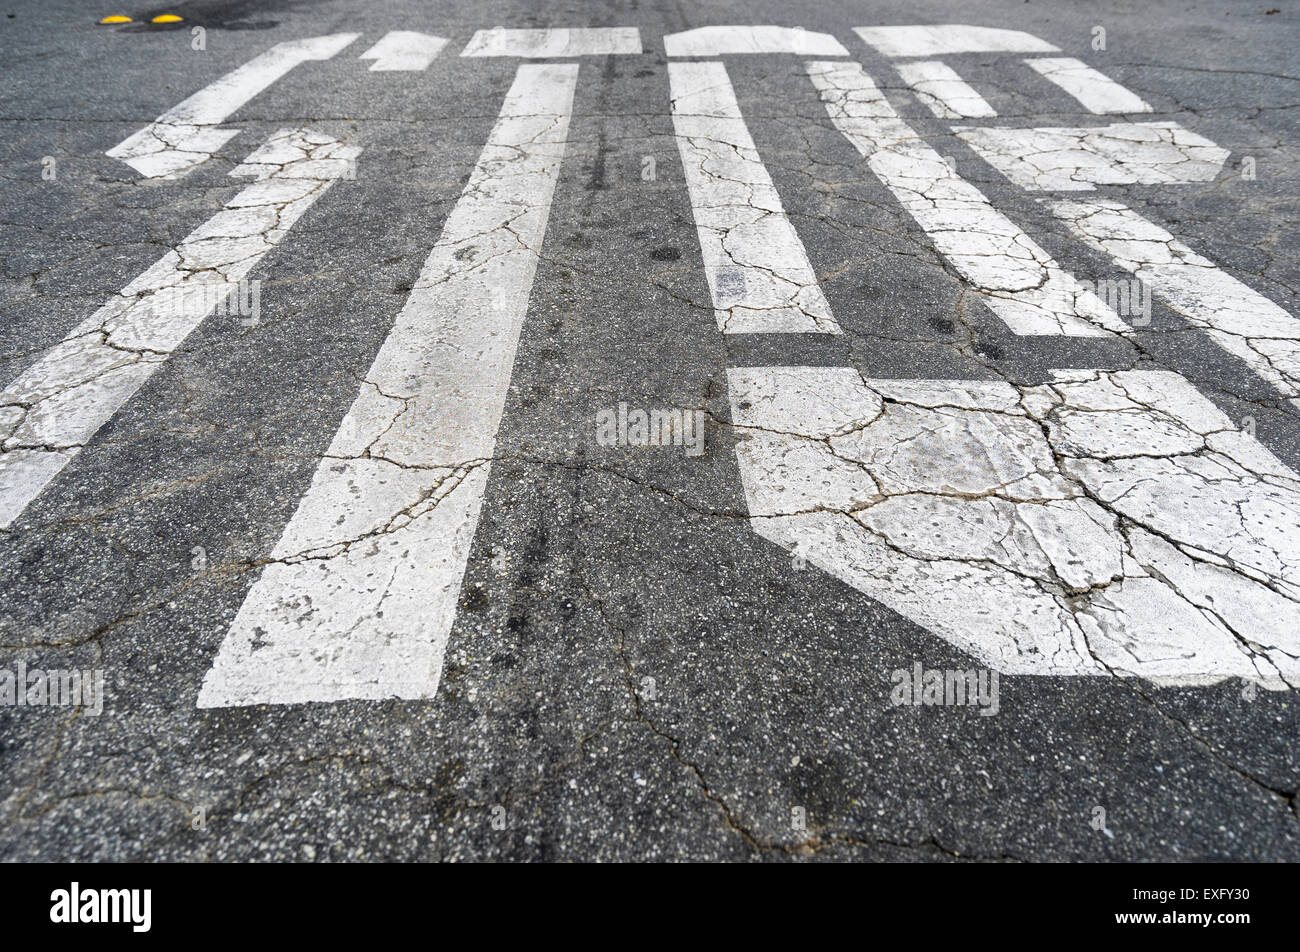 The word Stop painted on the road with cracks in the pavement Stock Photo